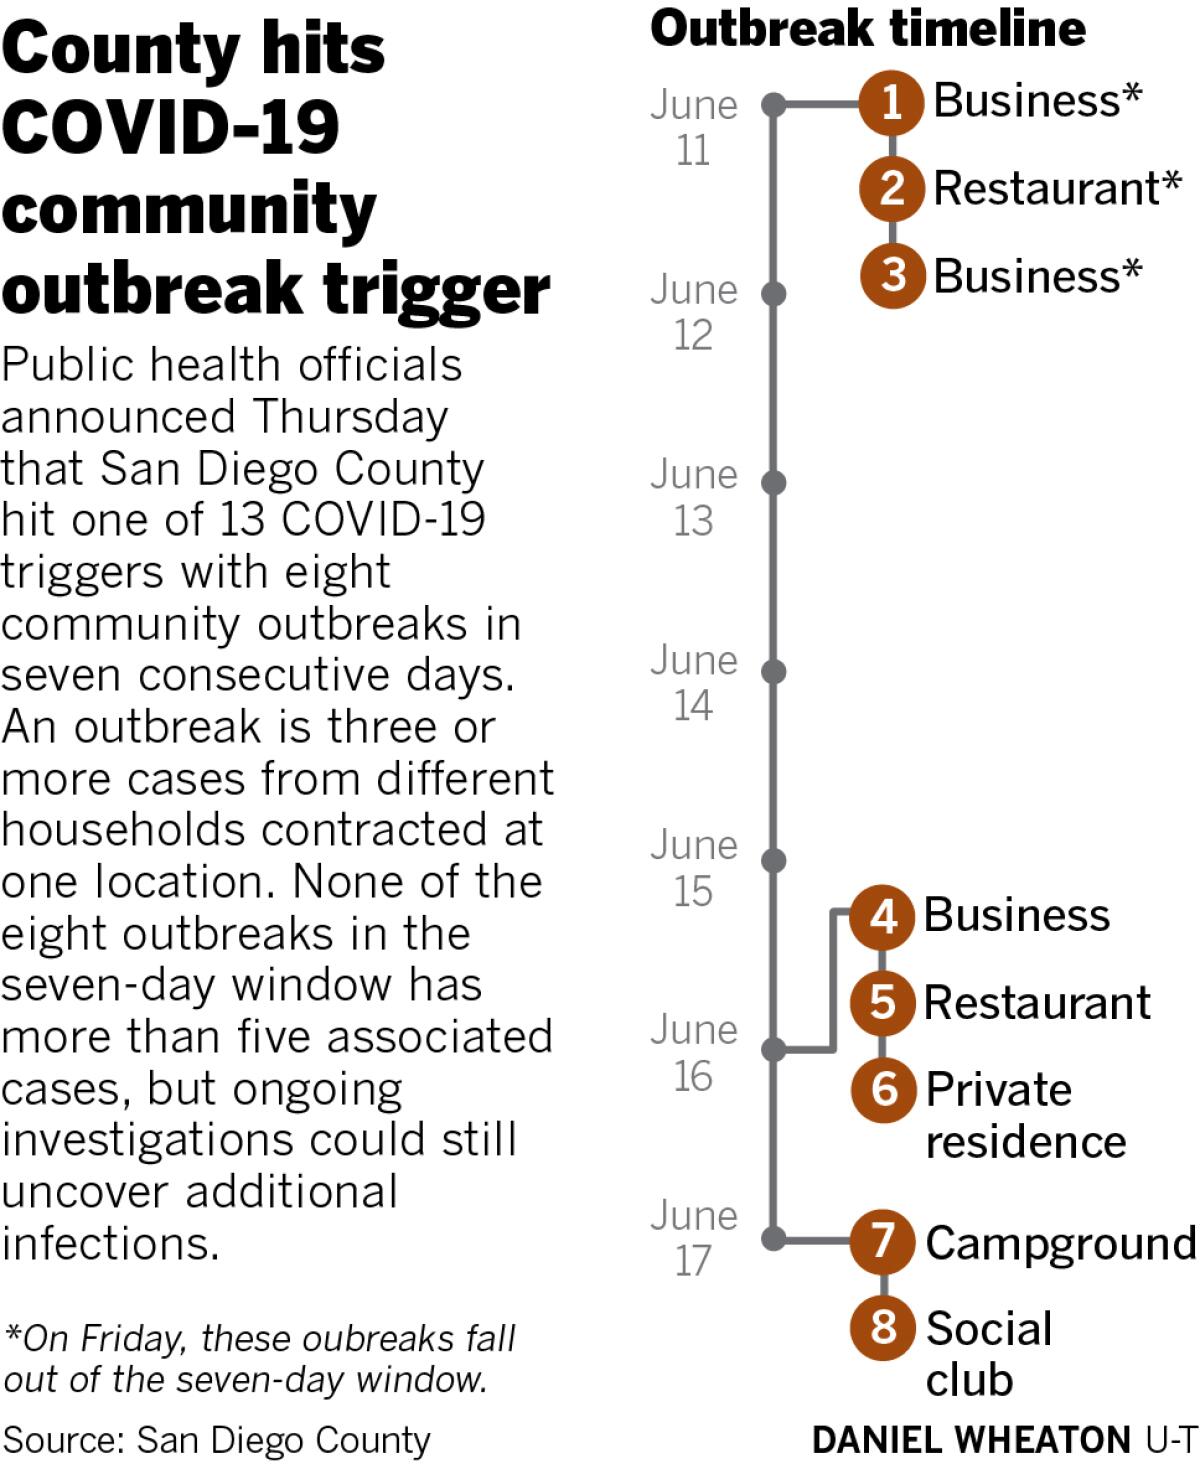 Timeline of community outbreaks that hit the trigger